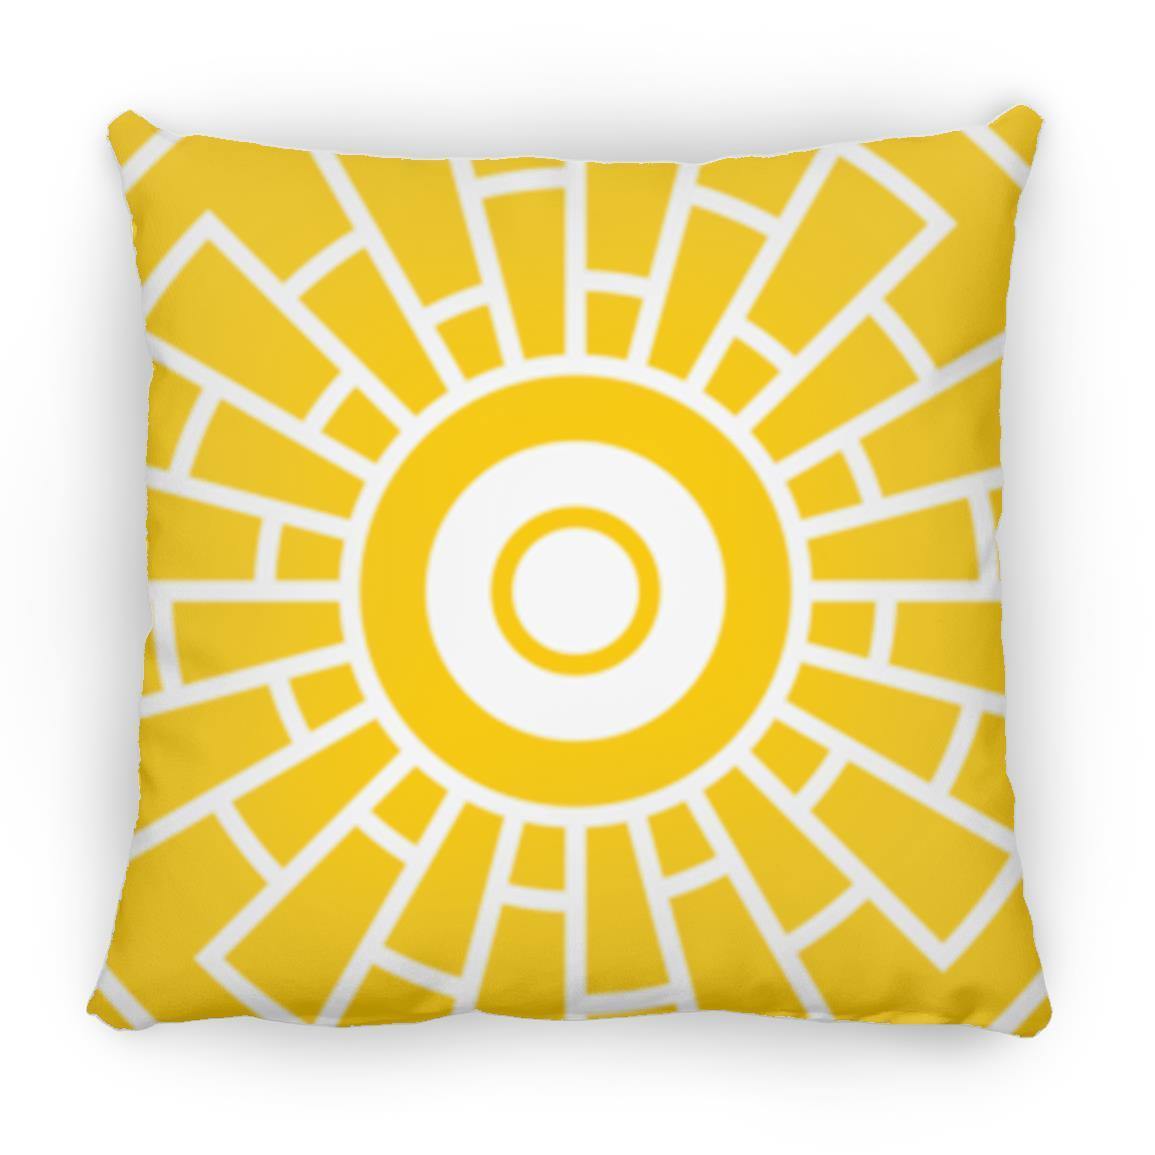 Crop Circle Pillow - Sixpenny Handley - Shapes of Wisdom